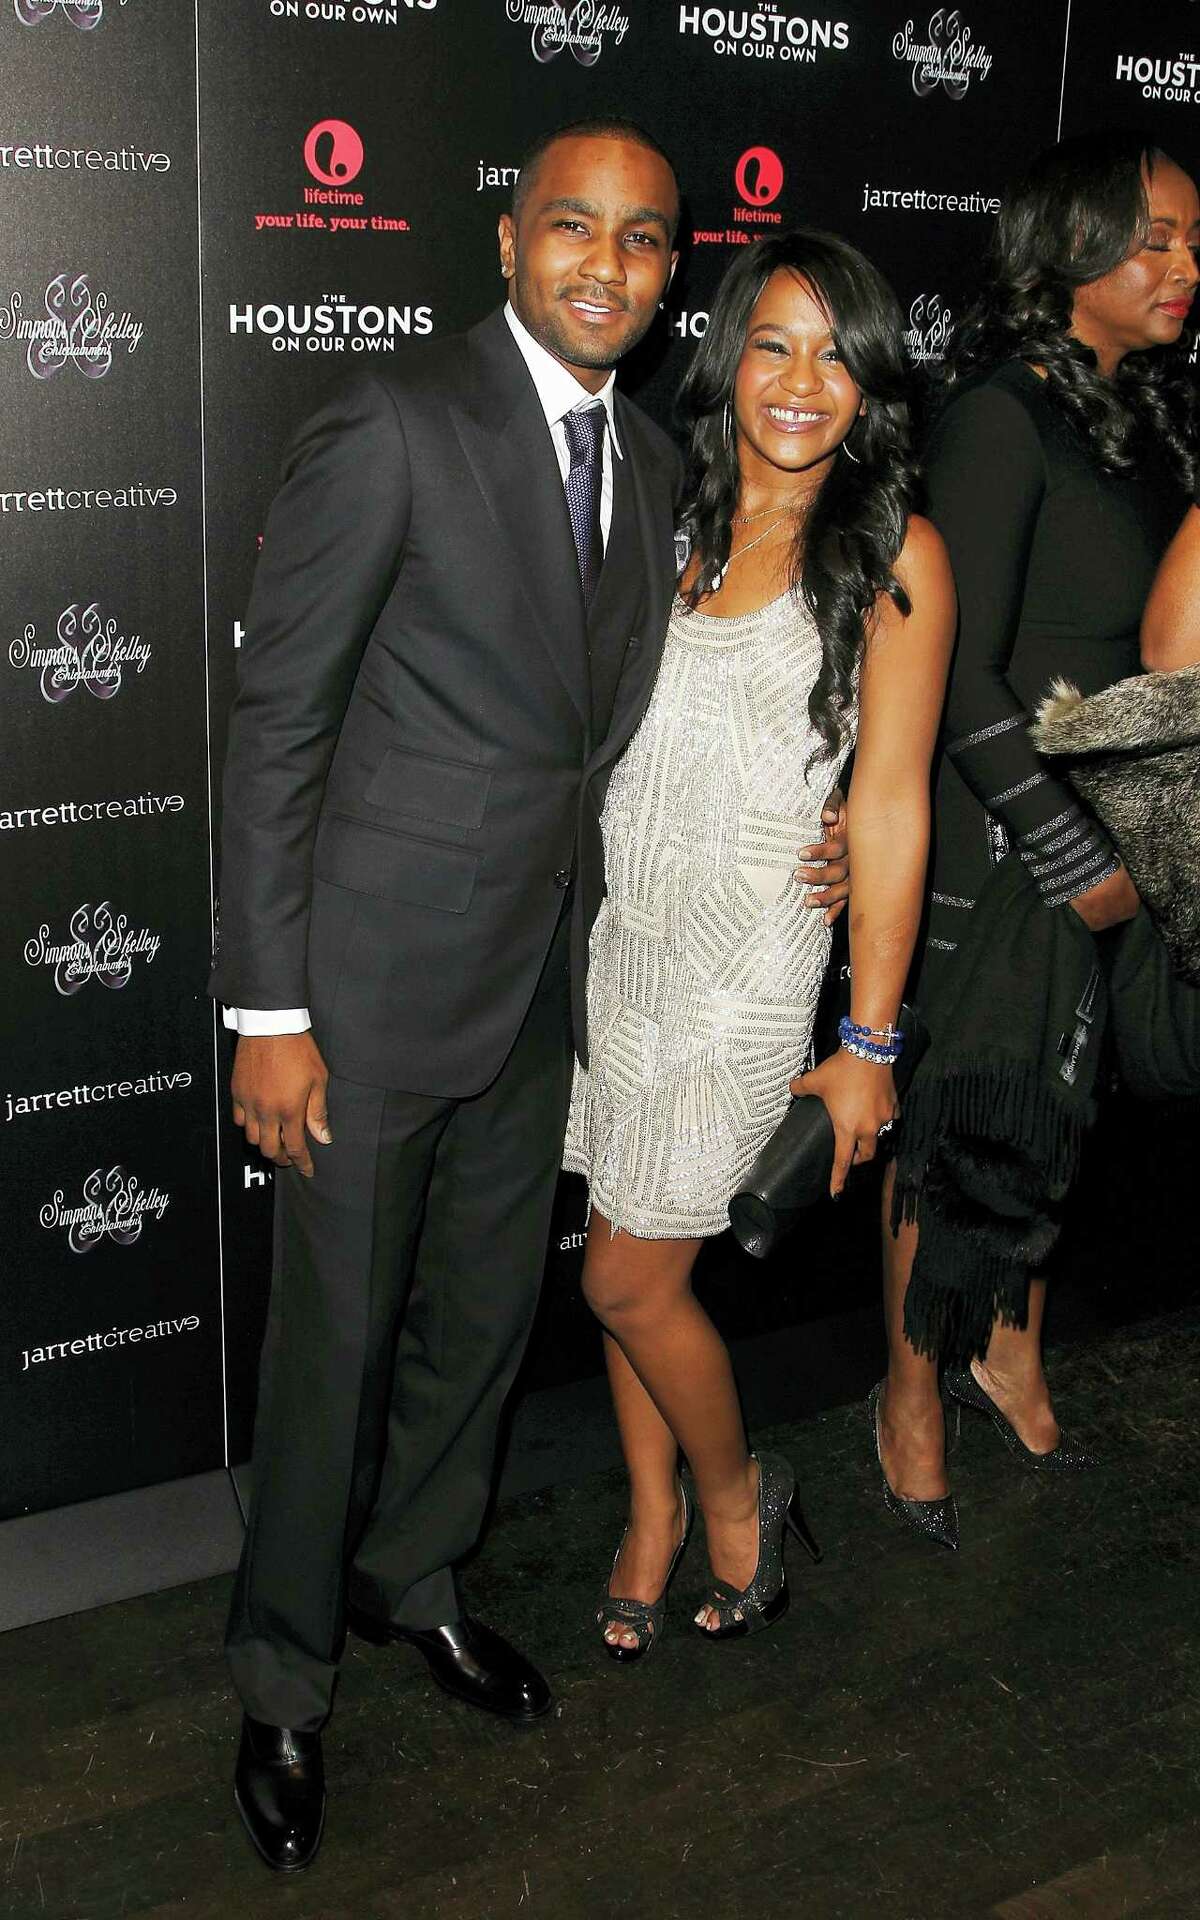 This Oct. 12, 2012, file photo shows Nick Gordon and Bobbi Kristina Brown attending the premiere party for “The Houstons On Our Own” at the Tribeca Grand hotel in New York. A judge in Atlanta on Friday, Sept. 16, 2016, ruled against Gordon, in a wrongful death lawsuit filed by her estate. Fulton County Superior Court Judge T. Jackson Bedford signed an order saying Gordon repeatedly failed to meet court deadlines in the case and, therefore, the conservator of her estate wins by default.